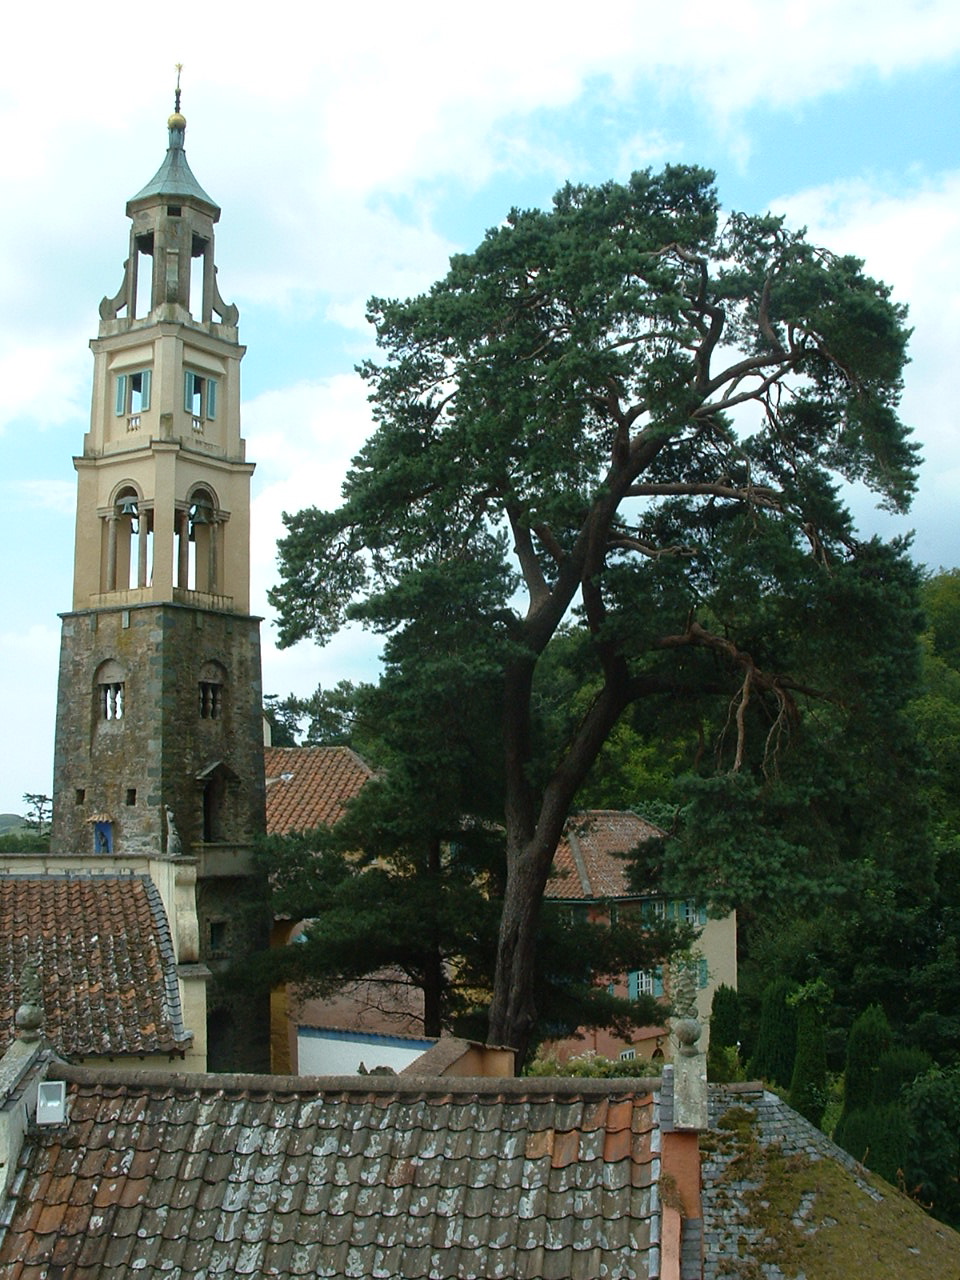 an old church is shown next to a tree